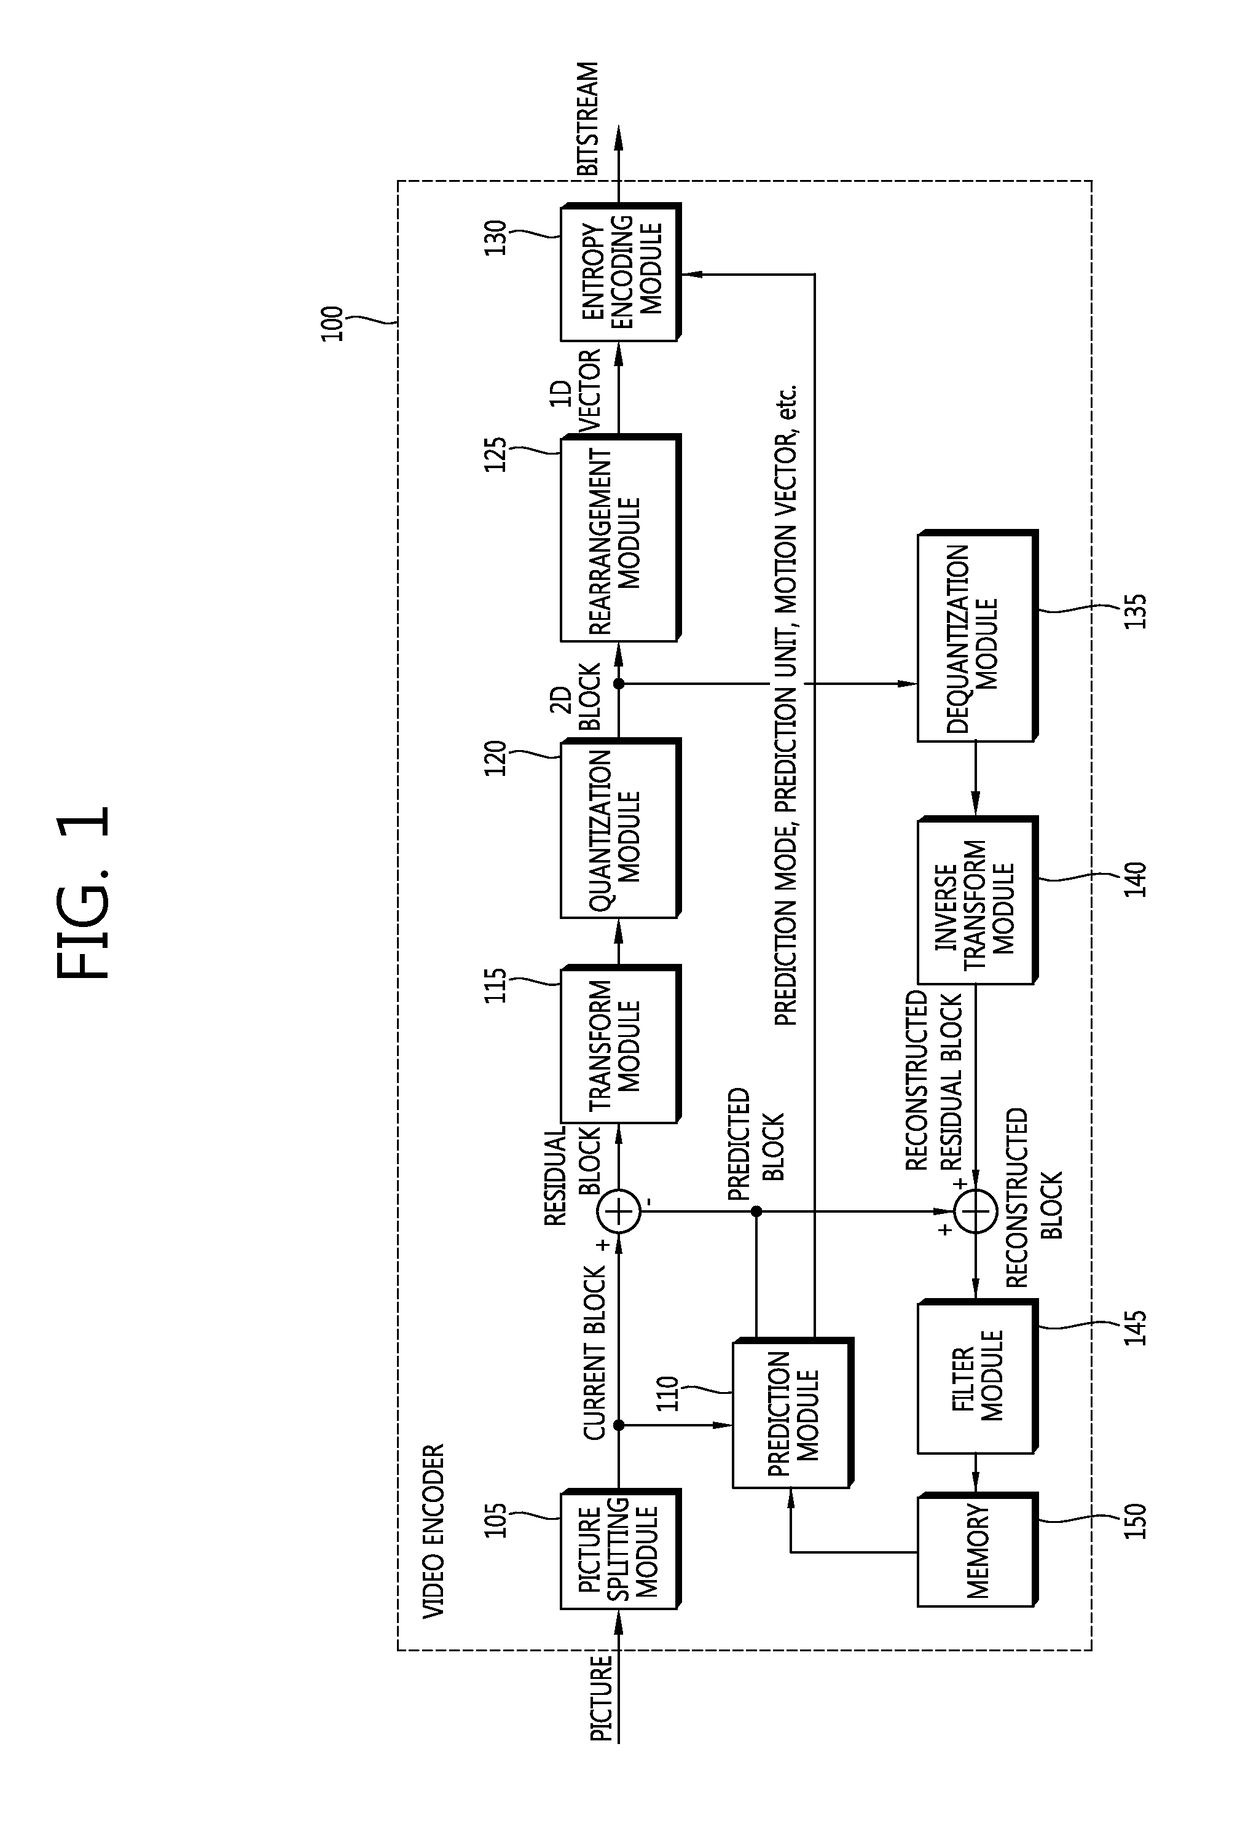 Method and apparatus for encoding/decoding video in intra prediction mode